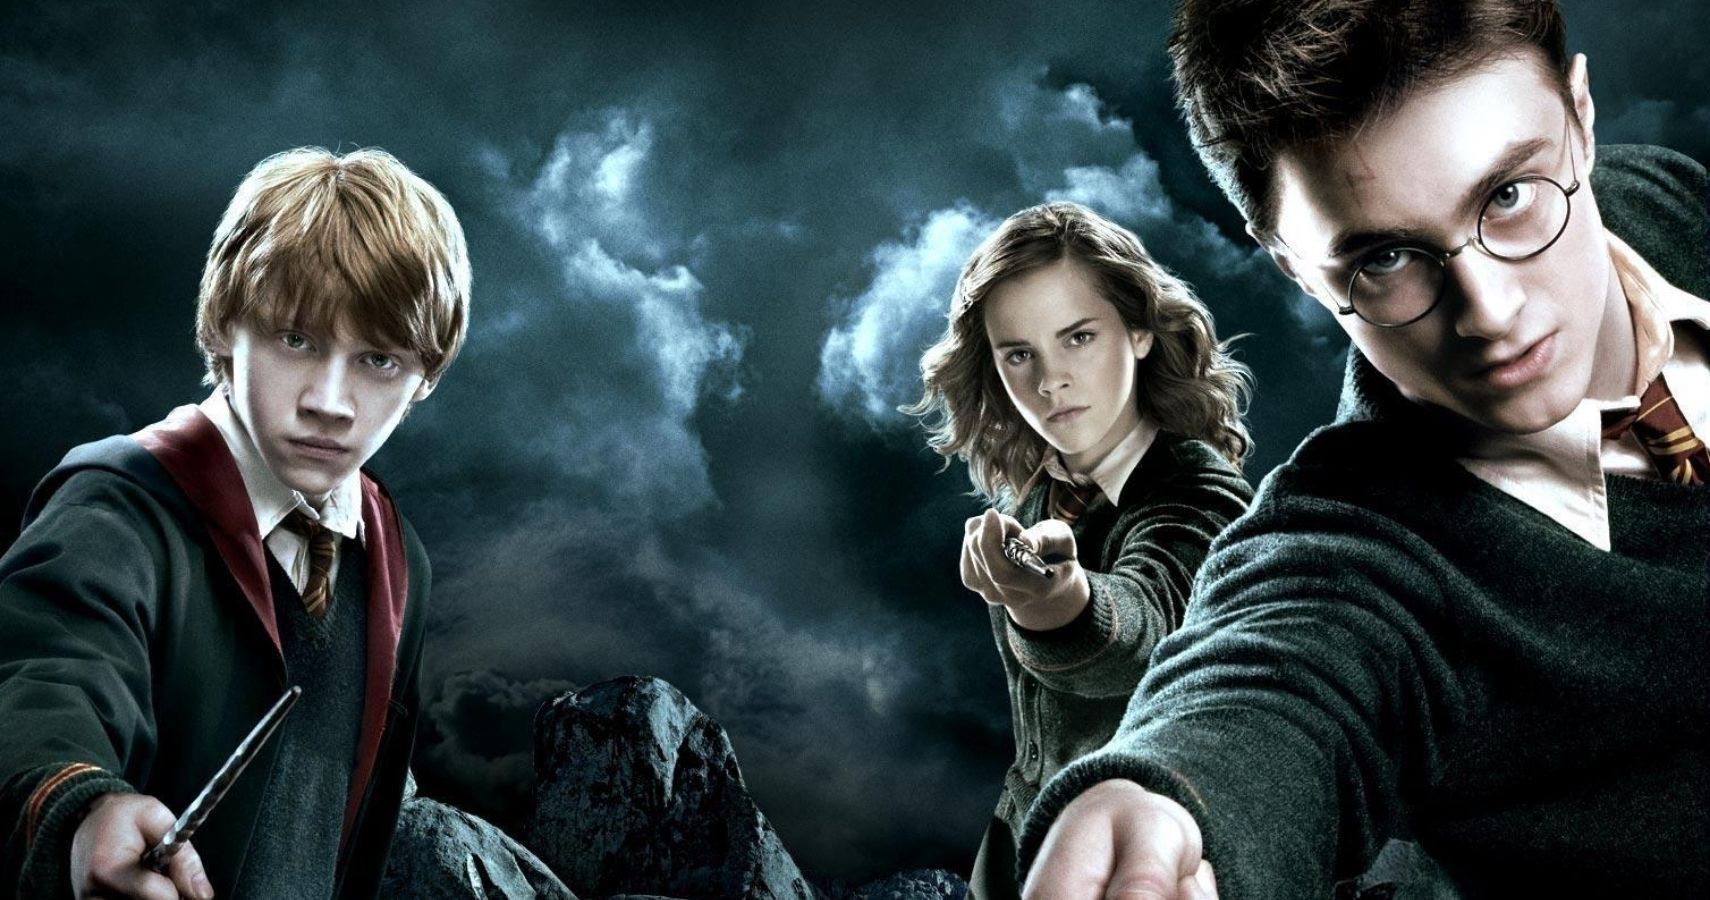 10 Of The Biggest Lessons We Can Learn From Harry Potter